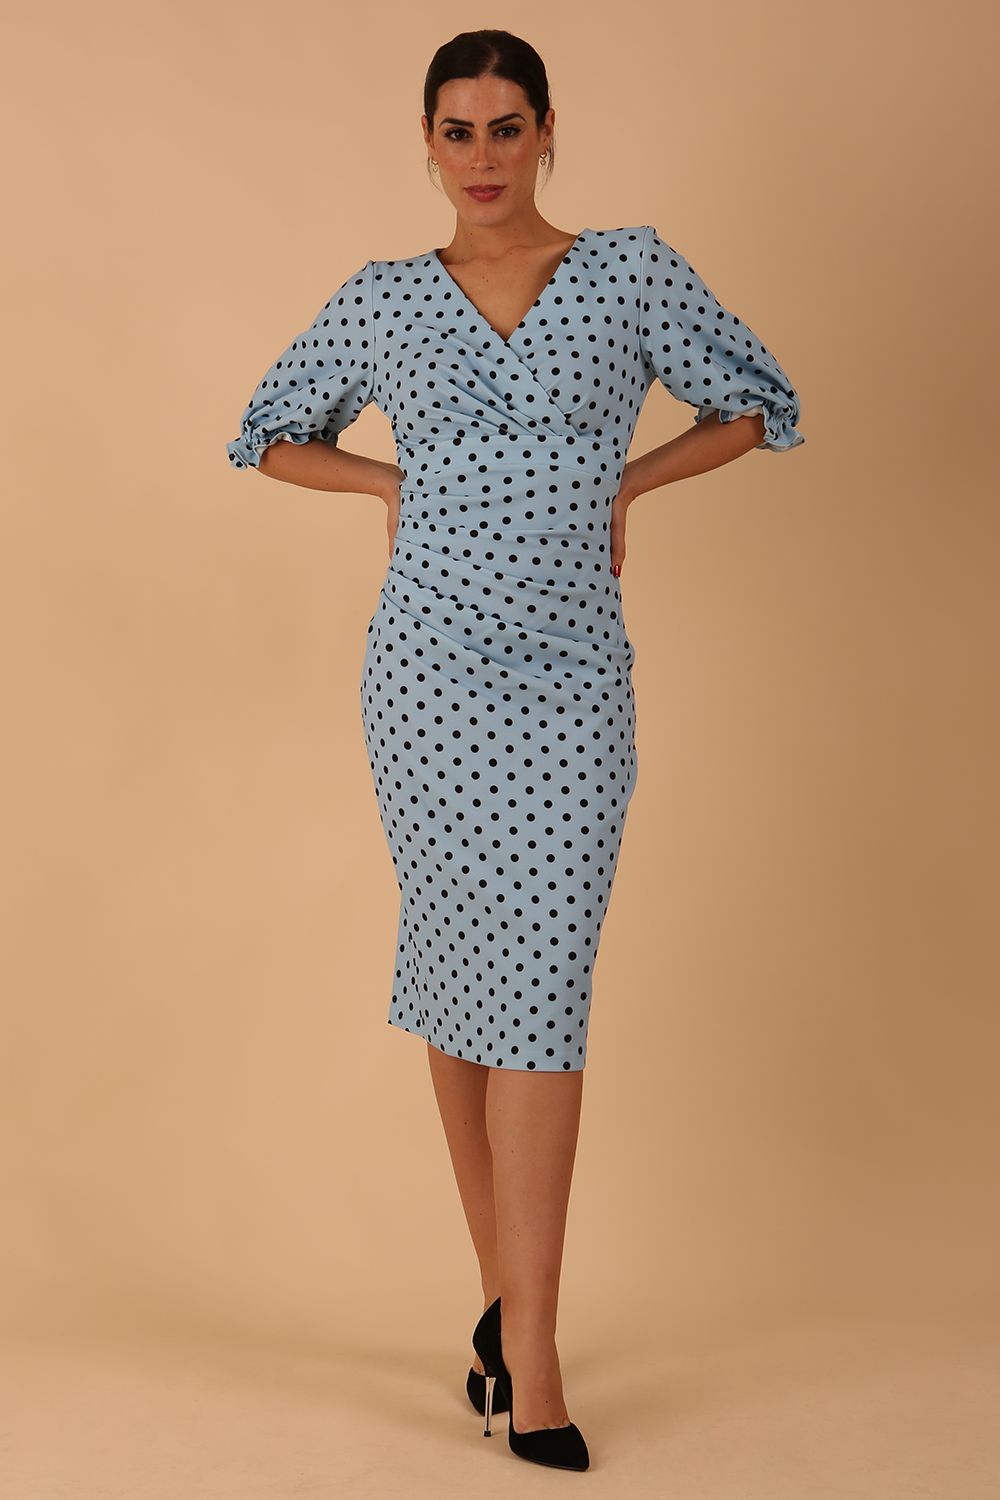  model wearing Diva Catwalk Palacio Pencil dress v neckline and pleating across the tummy with puffed short sleeves in blue polka dot front